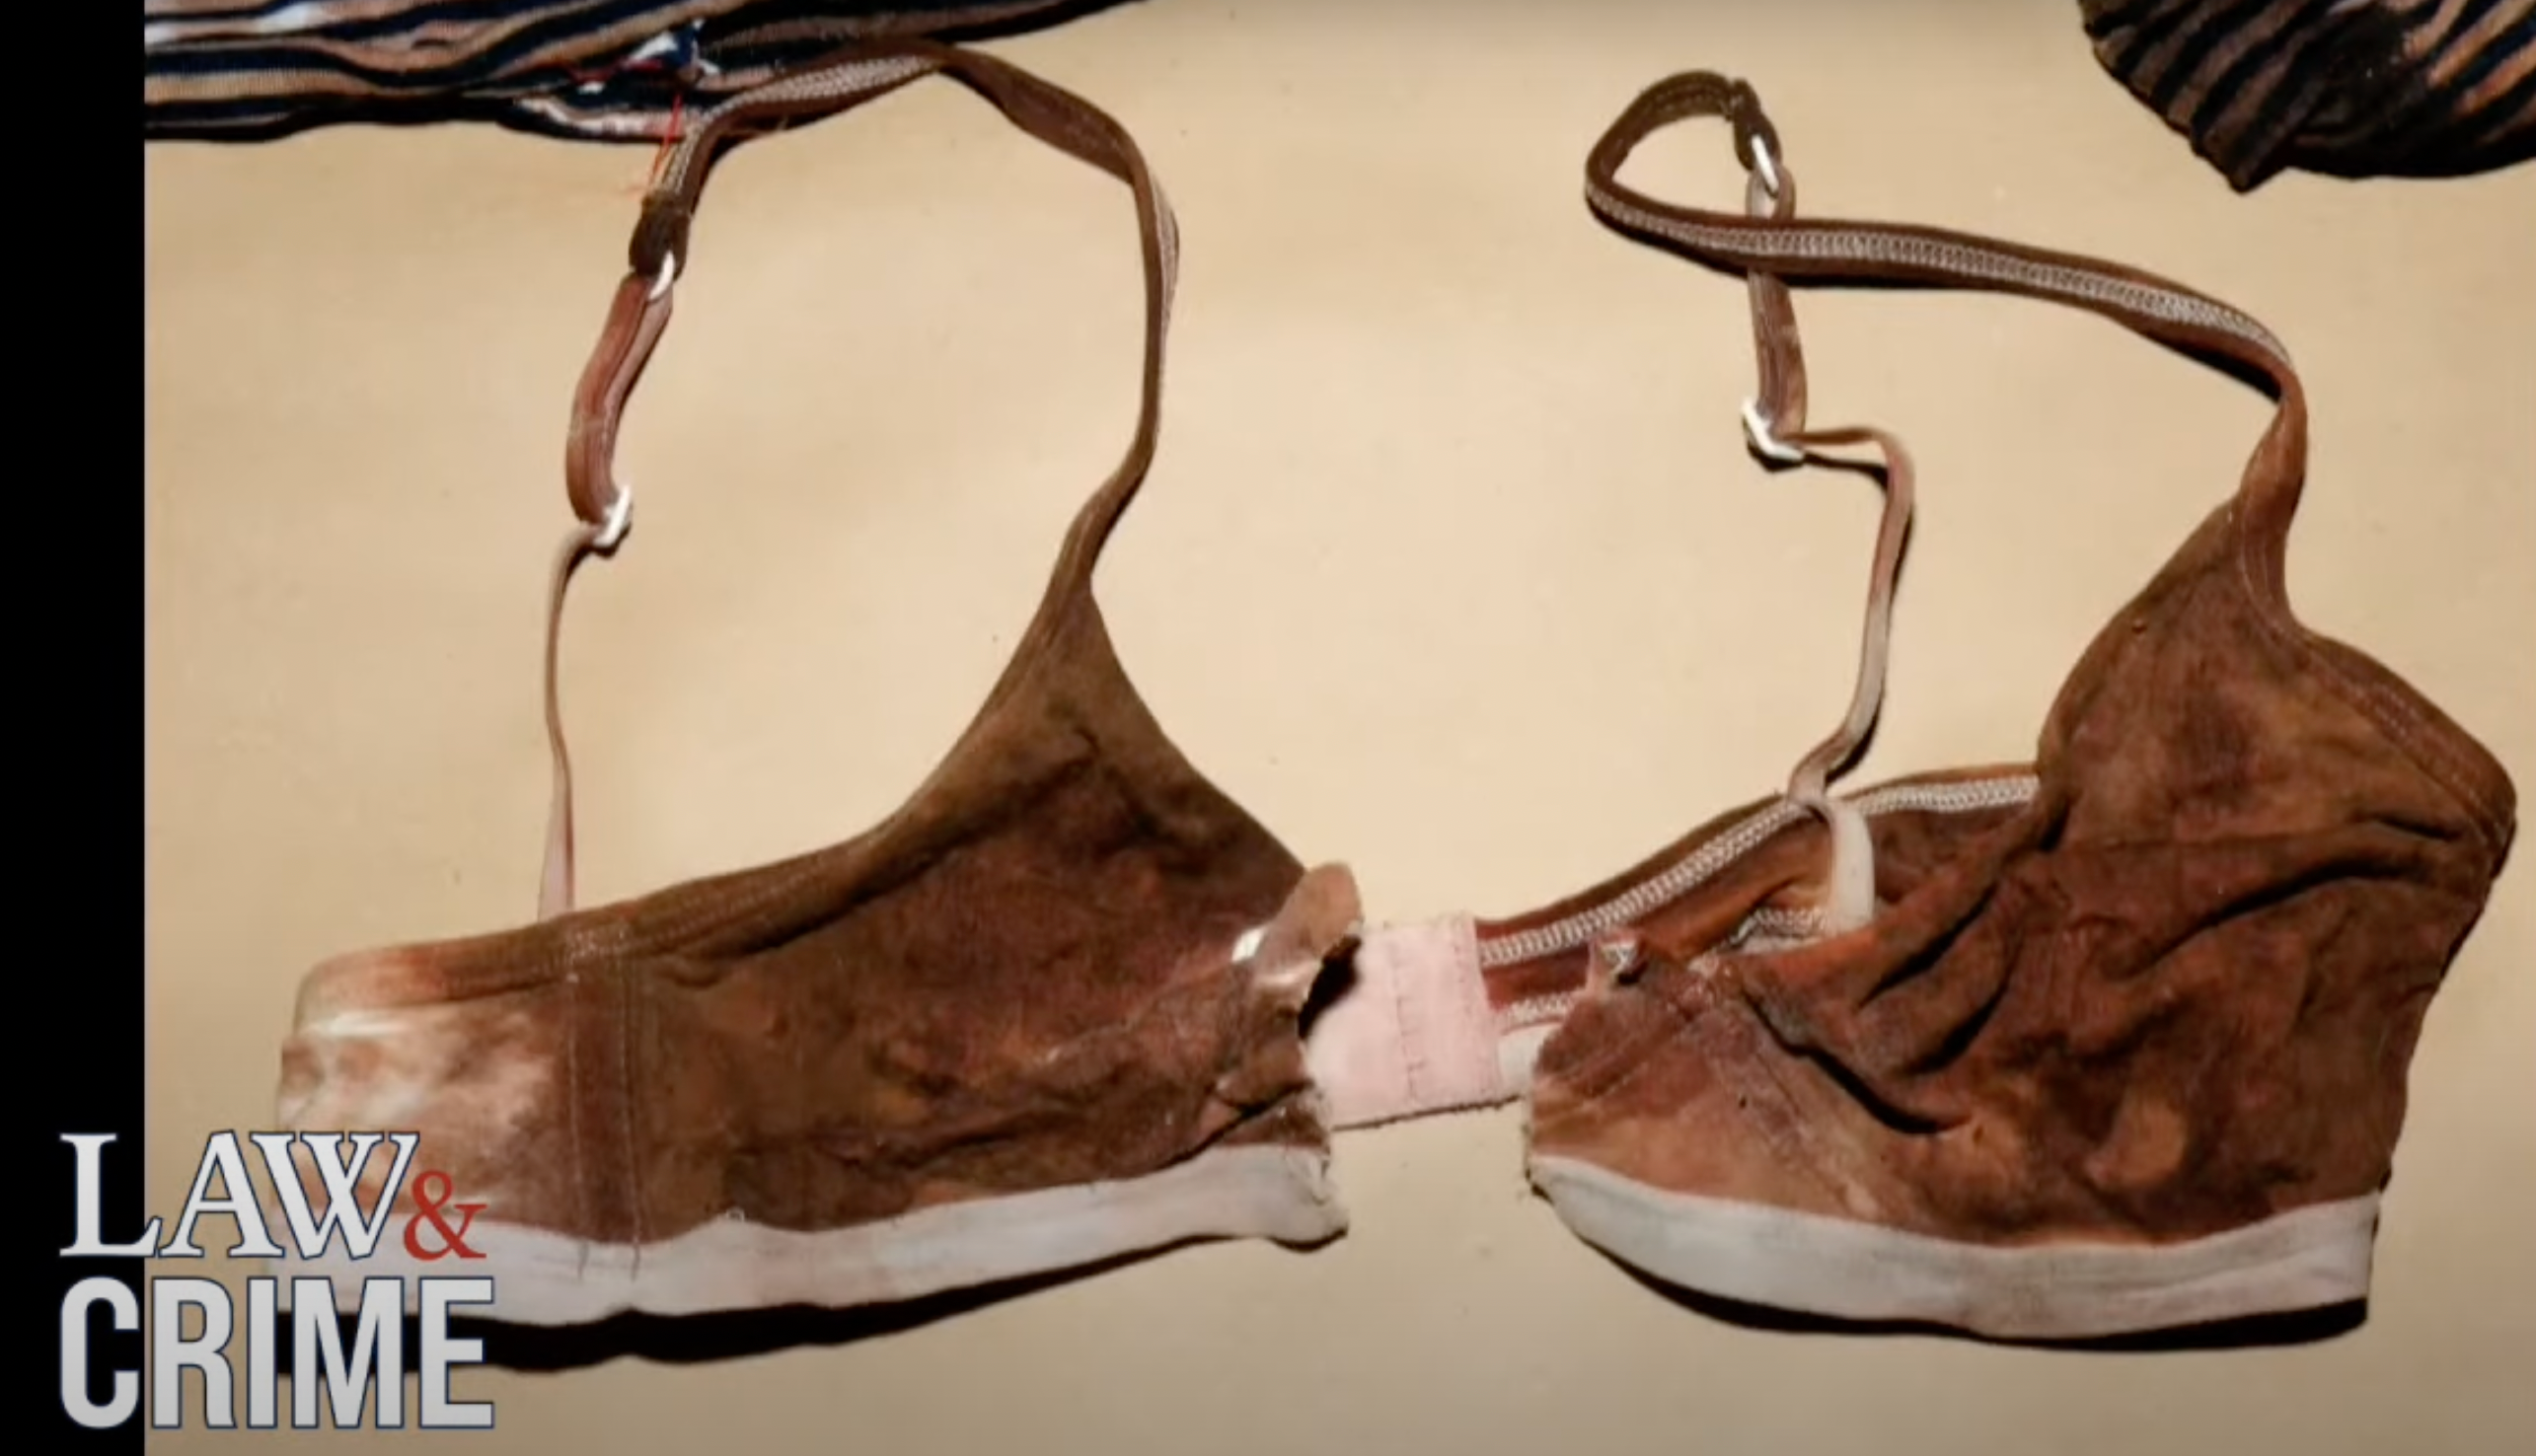 A white bra stained with a ‘blood-like substance’ was also presented in court